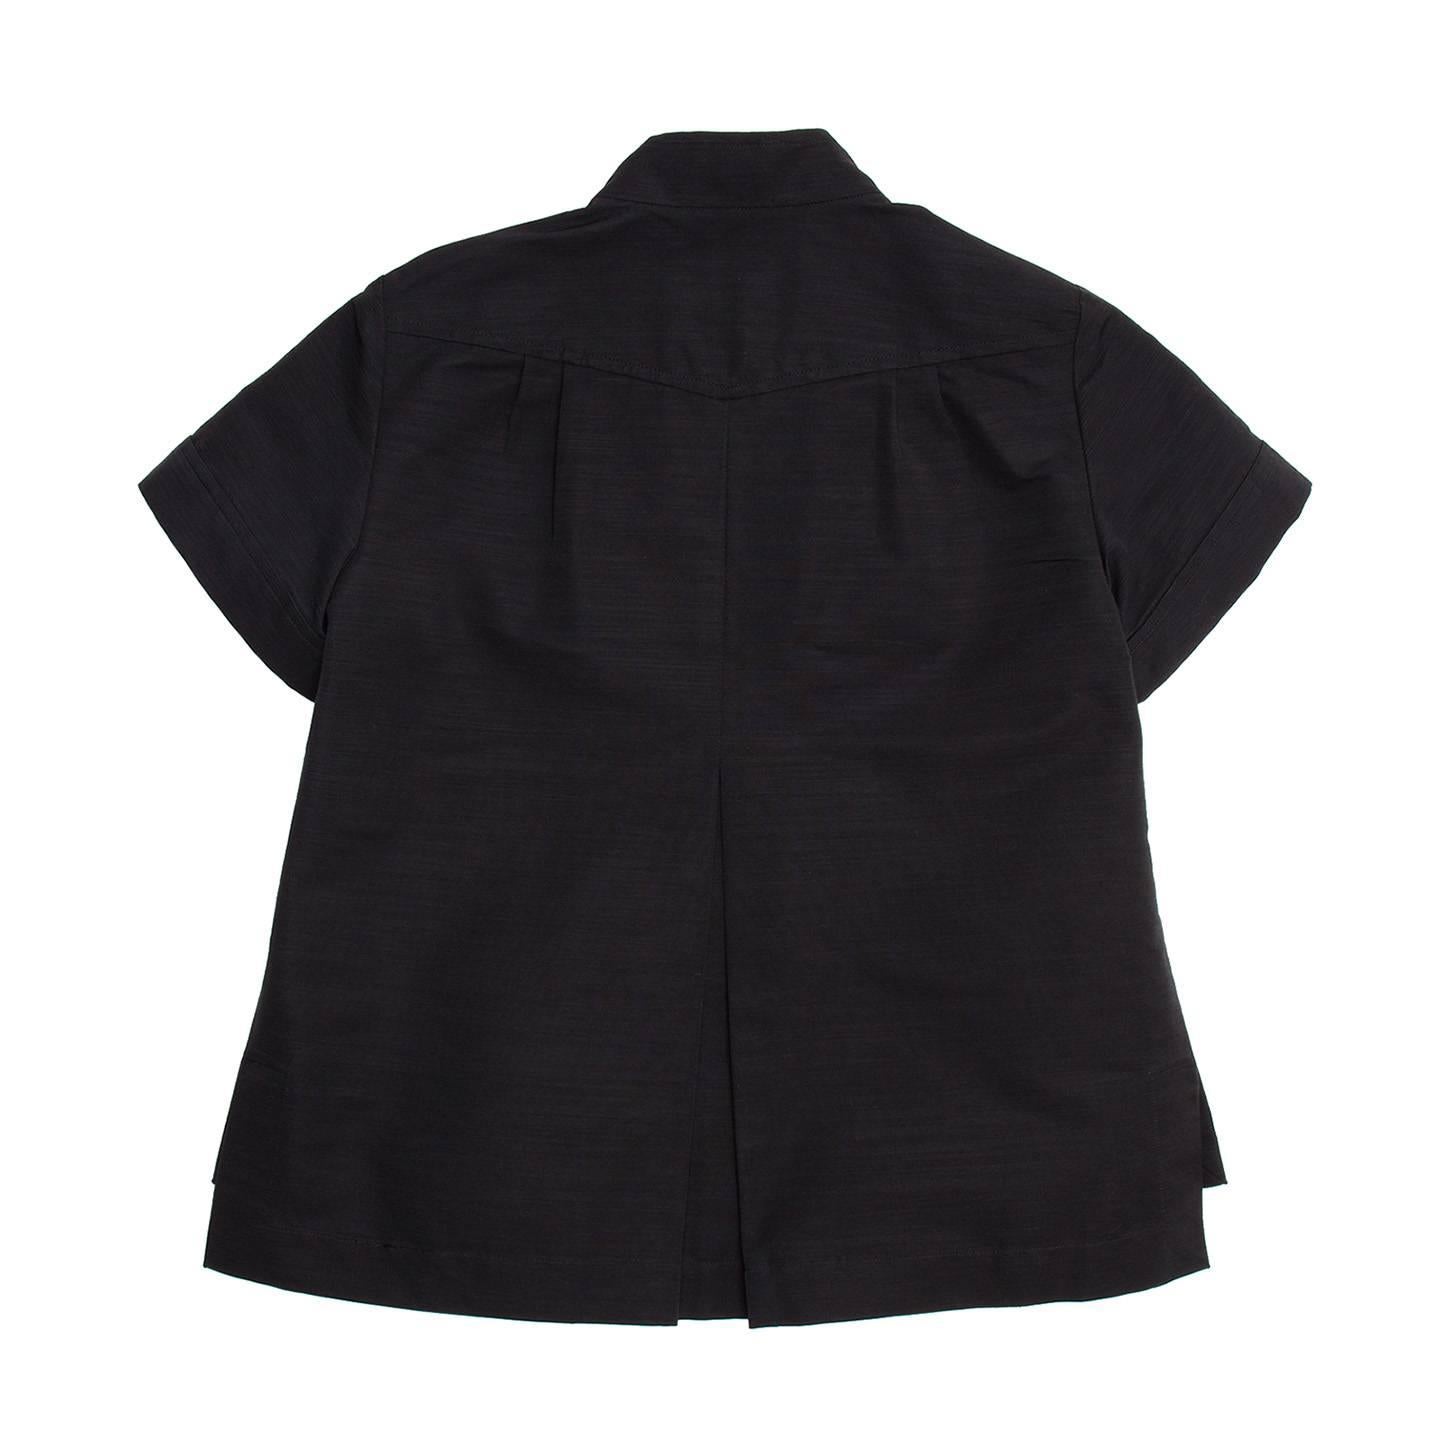 Women's Chanel Black Cotton Shirt Jacket Style With Bow Detail For Sale